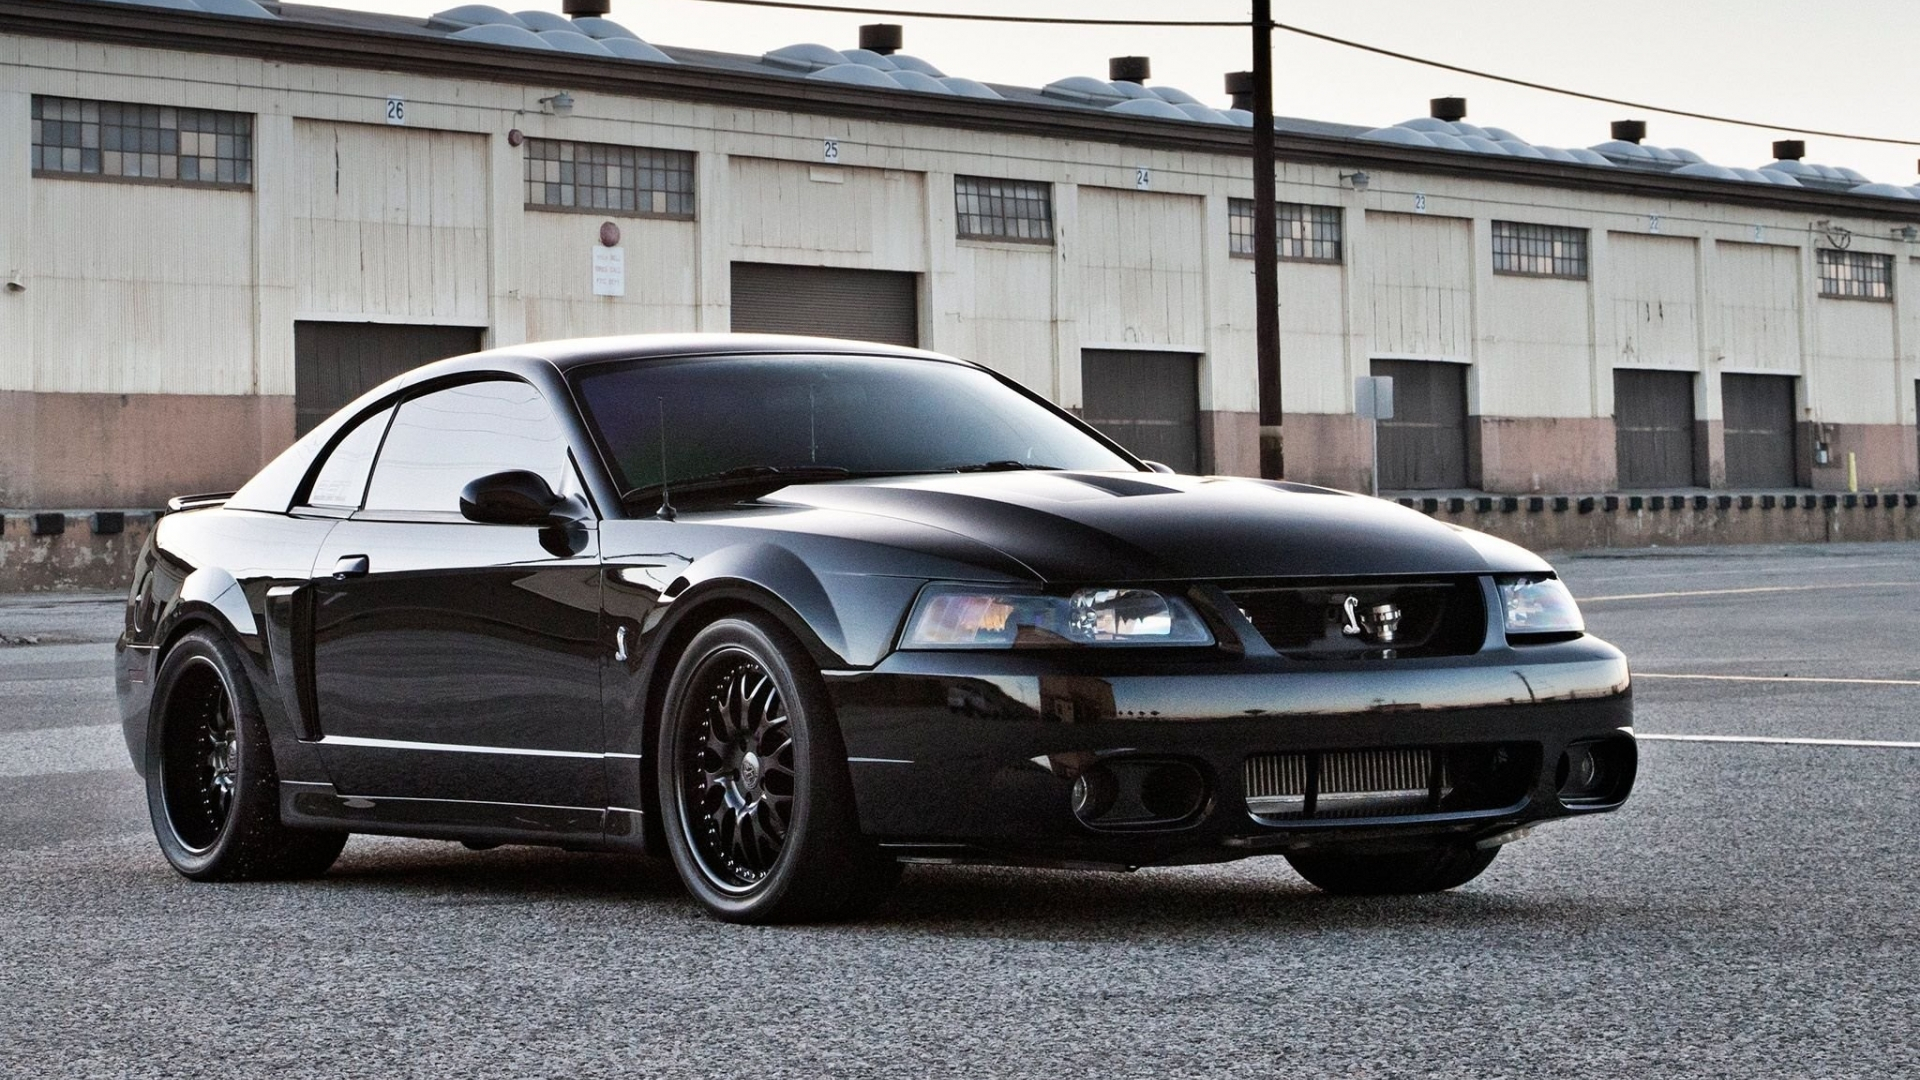 1920x1080 2003 Ford Mustang Wallpapers